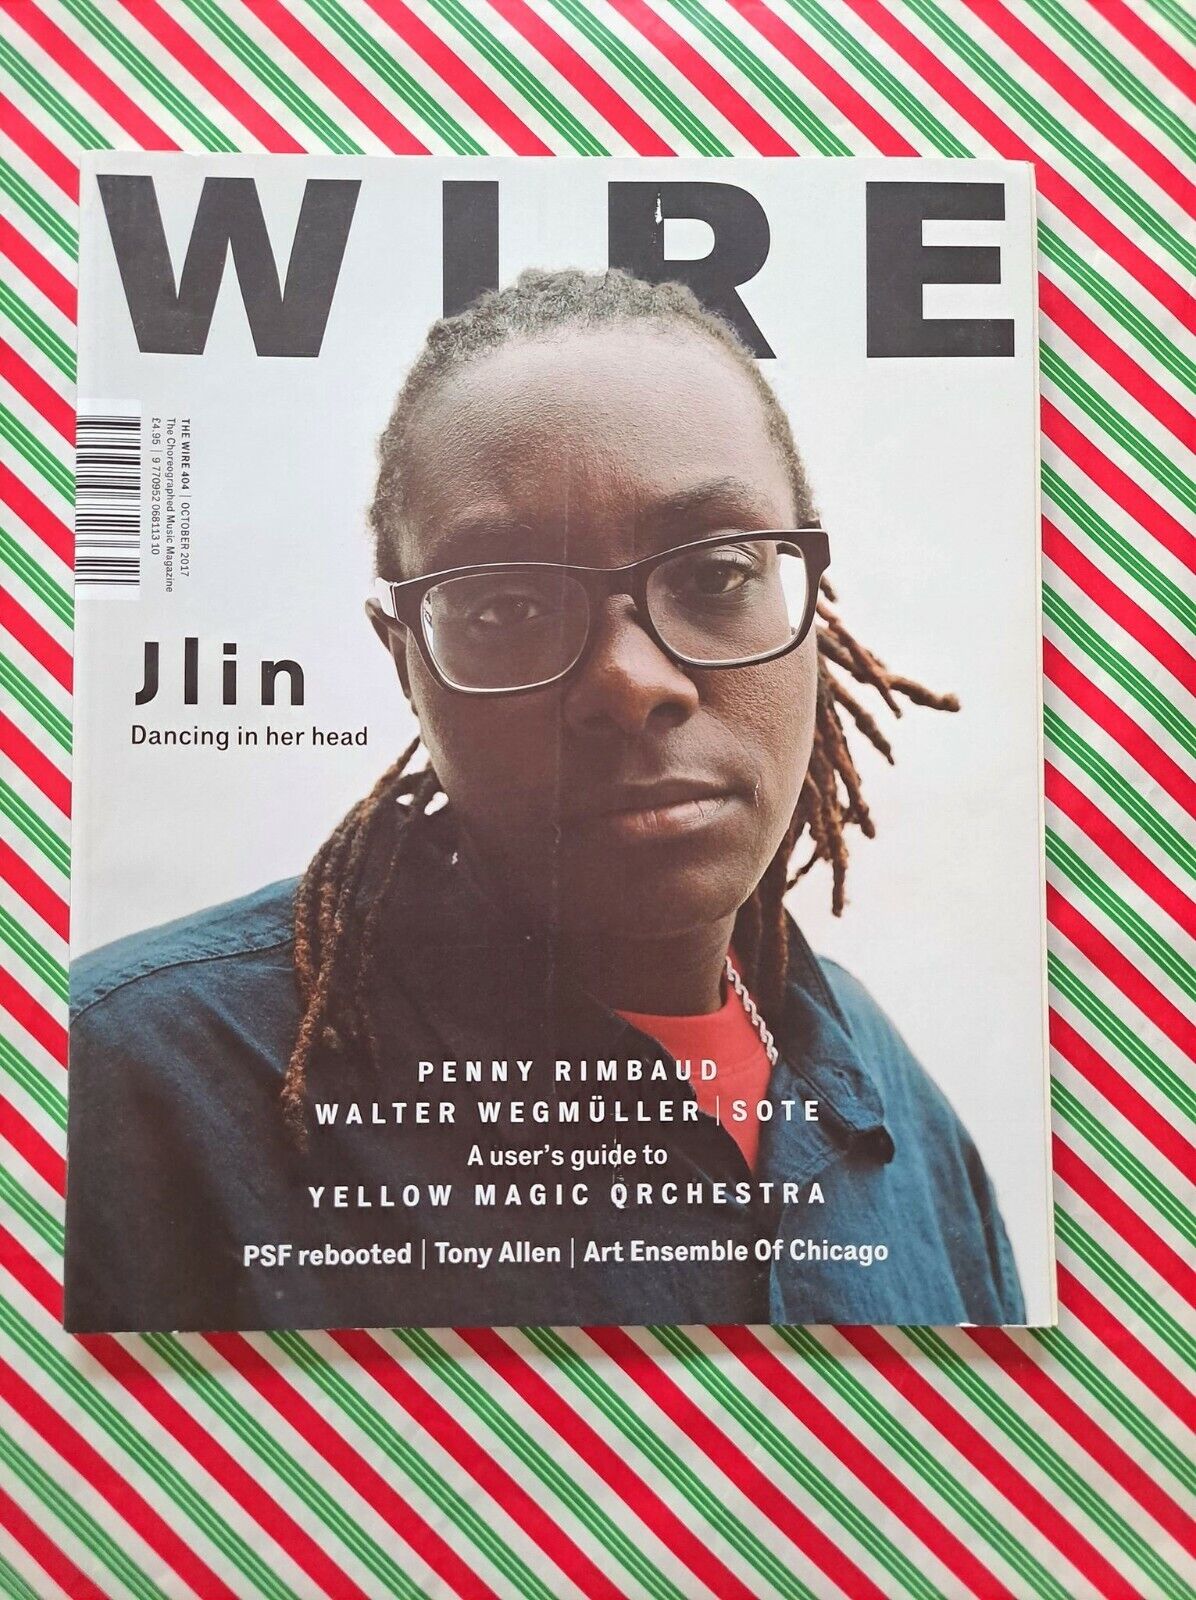 The Wire Magazine October 2017 - Jlin - Perry Rimbaud - Yellow Magic Orchestra